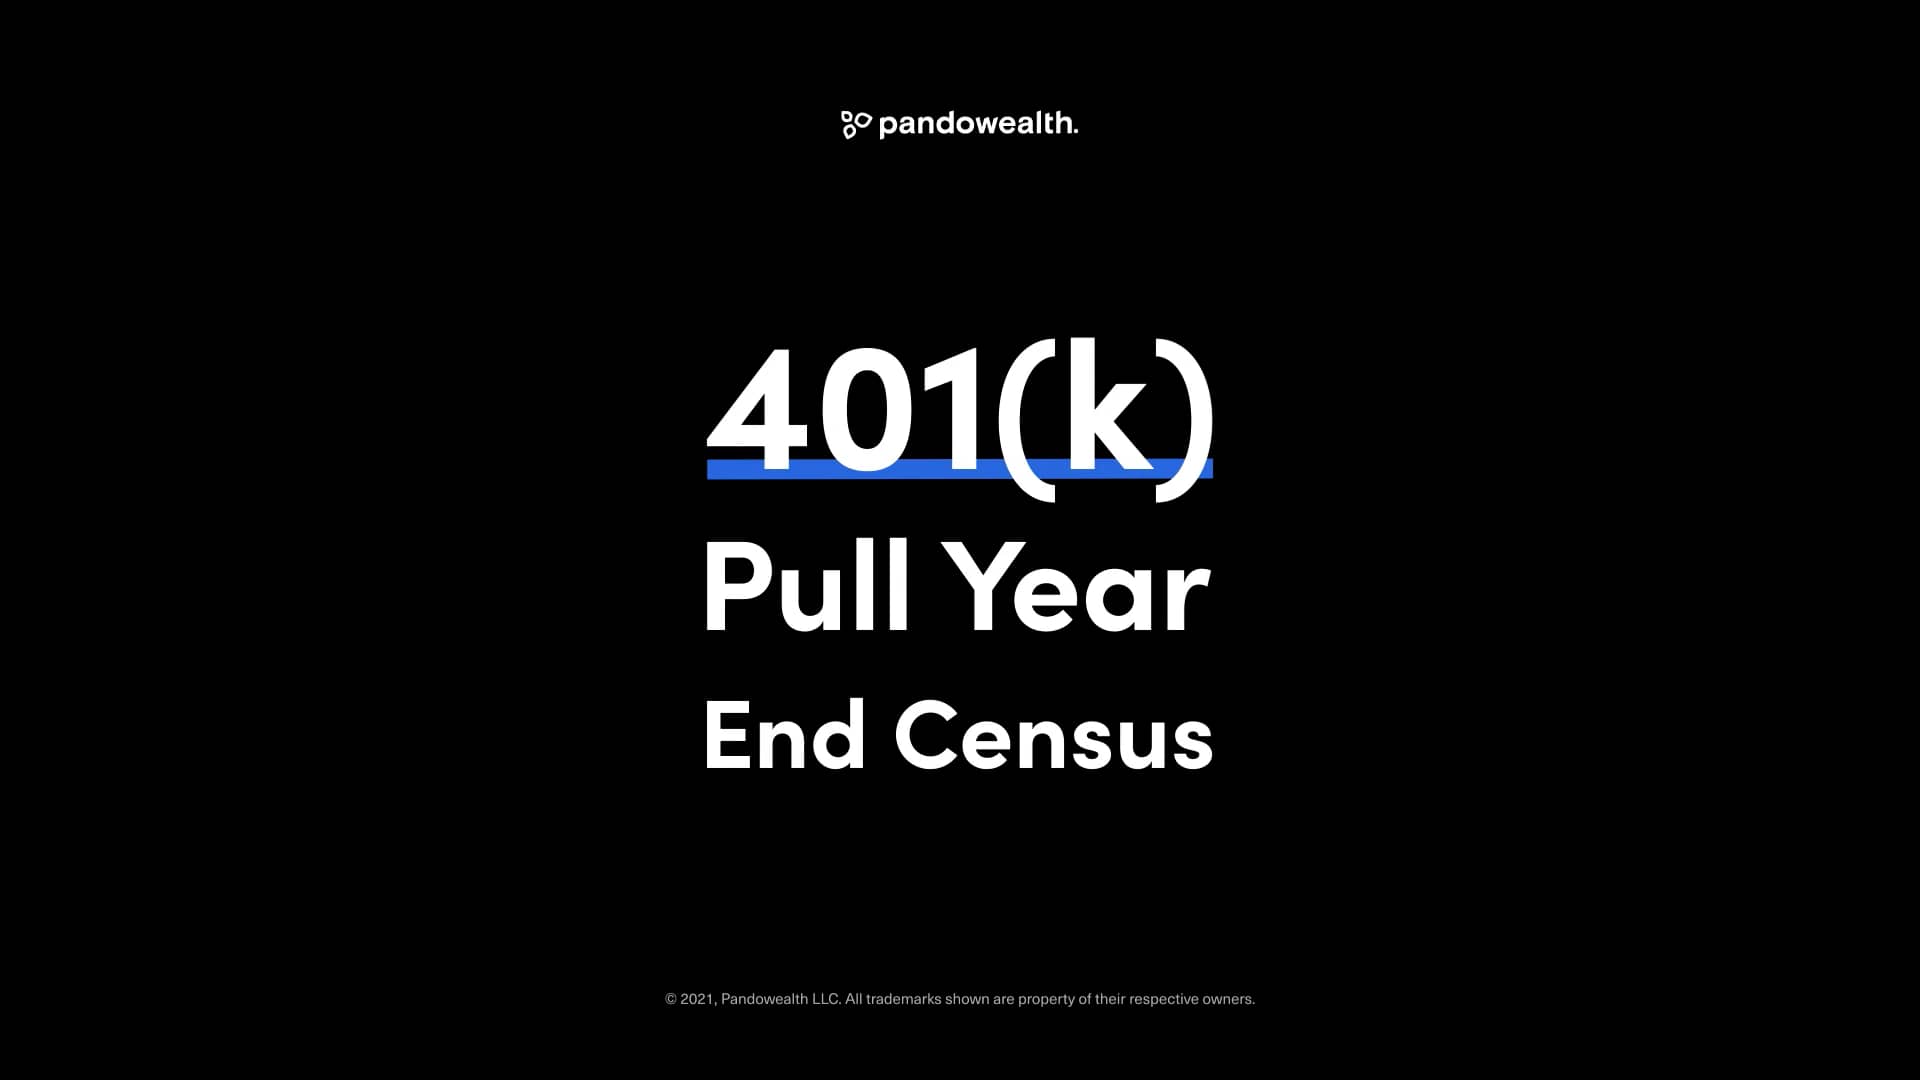 How to download 401K Census for Year End on Vimeo